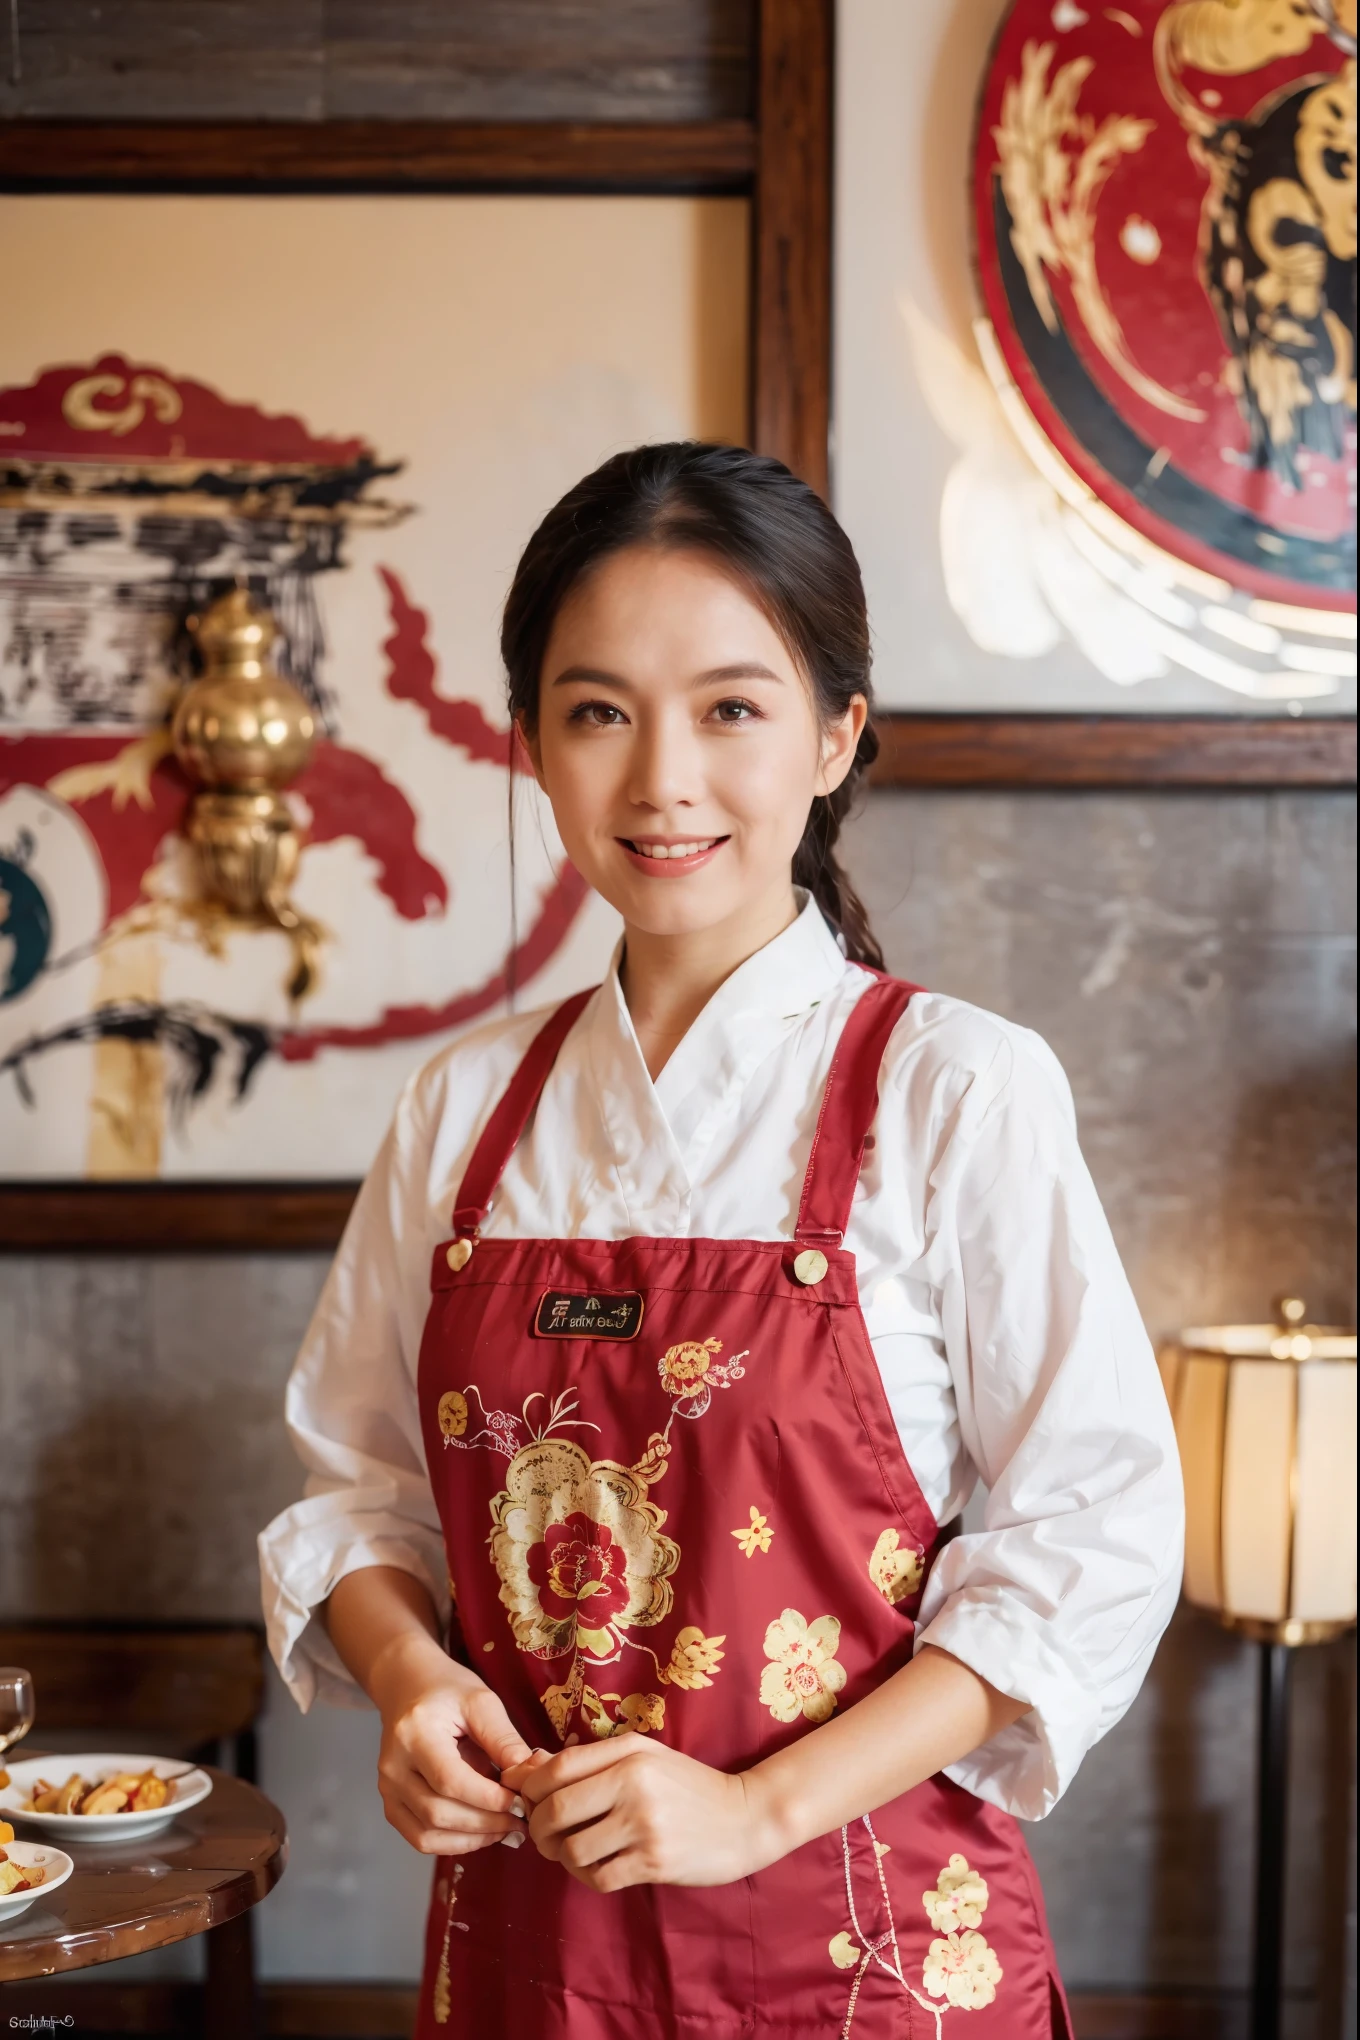 （Super fine，fidelity：1.37），portrait，Chinese restaurant owner，dark hair，brown eyes，delicate lips，Tie an apron，confident smile，well groomed appearance，Chinese traditional spring clothes，floral pattern，Standing in a brightly lit restaurant，antique wooden furniture，Elaborately carved decoration，Chinese traditional elements，Beautifully painted porcelain plates and teapots，Authentic Chinese cuisine，Vibrant color palette，Defocused lights in the background create a warm and inviting atmosphere